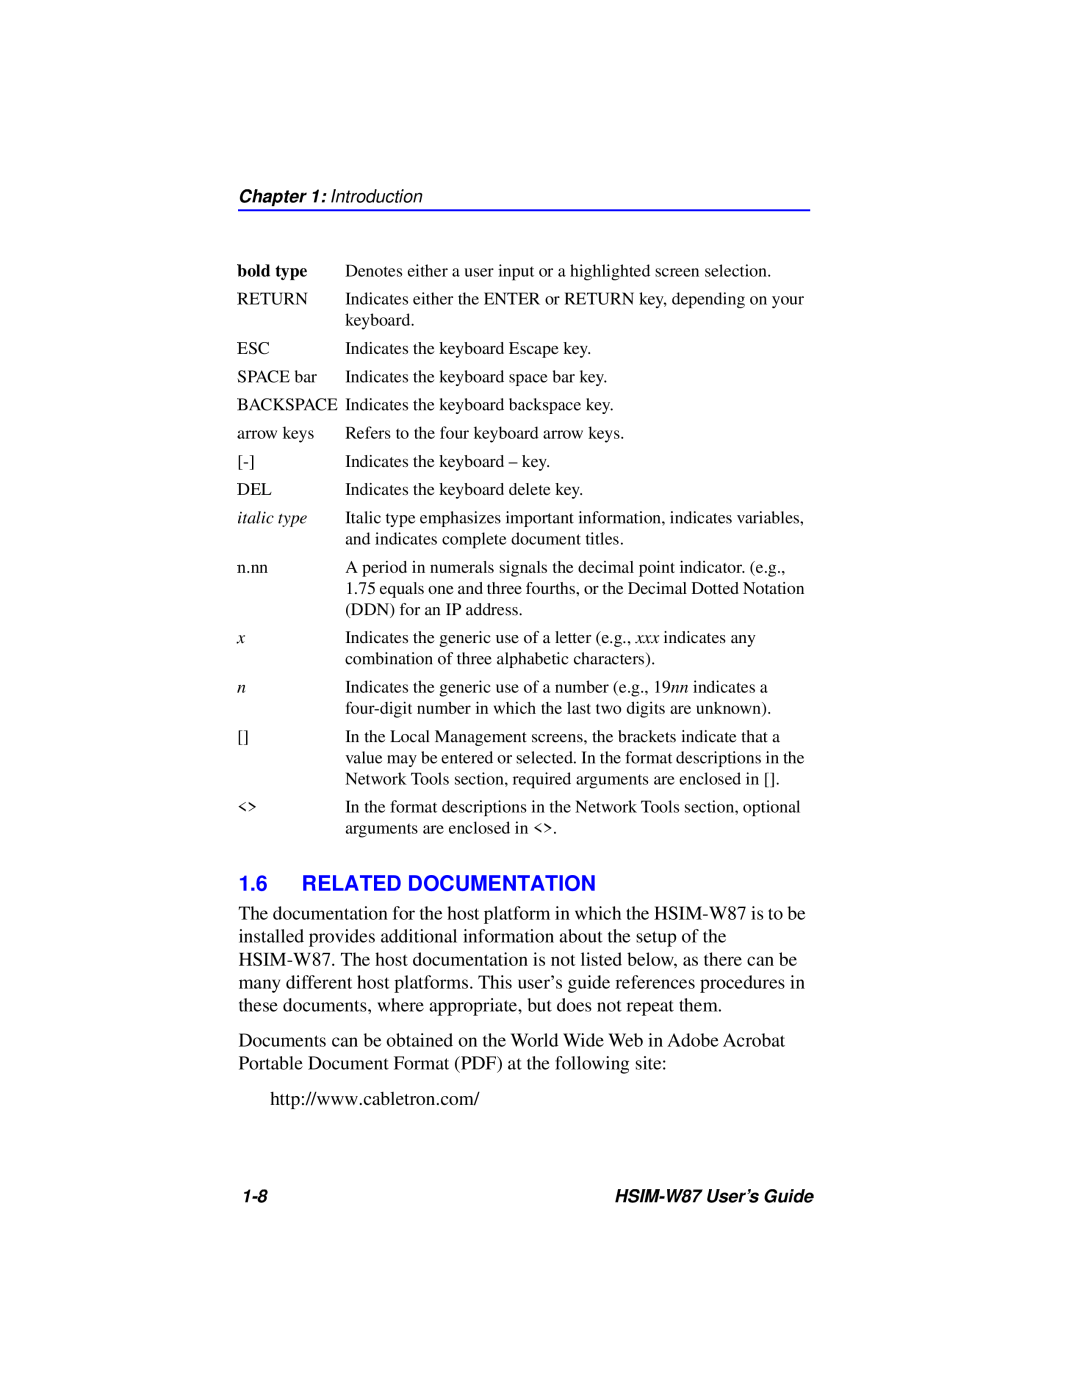 Cabletron Systems HSIM-W87 manual Related Documentation, bold type 